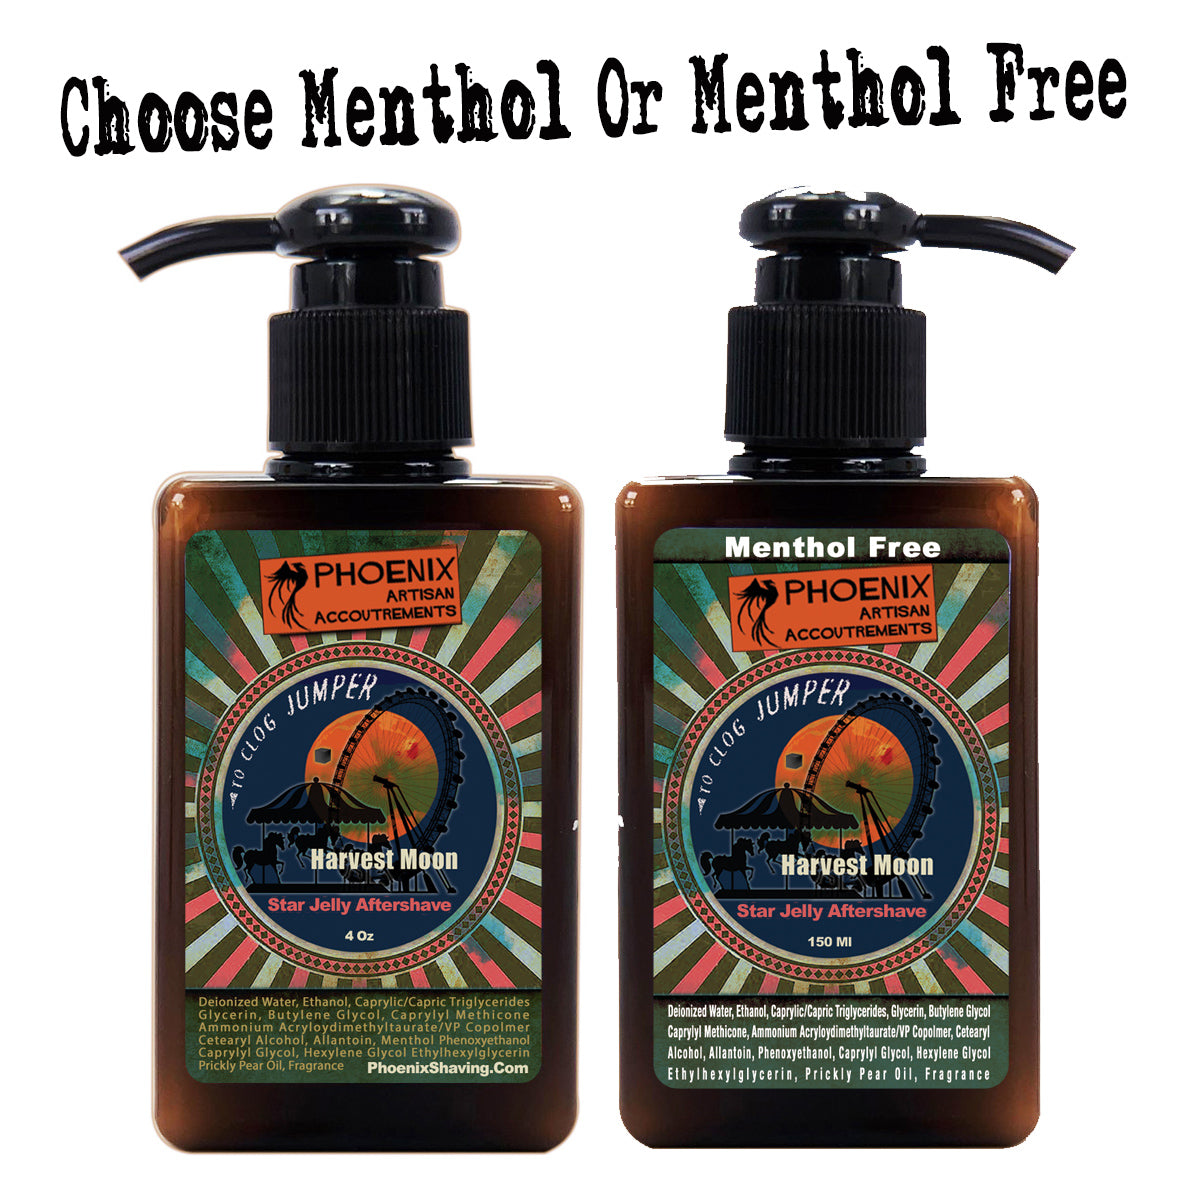 Harvest Moon Star Jelly Aftershave | Menthol Free Or Mentholated! | A Phoenix Shaving Classic!